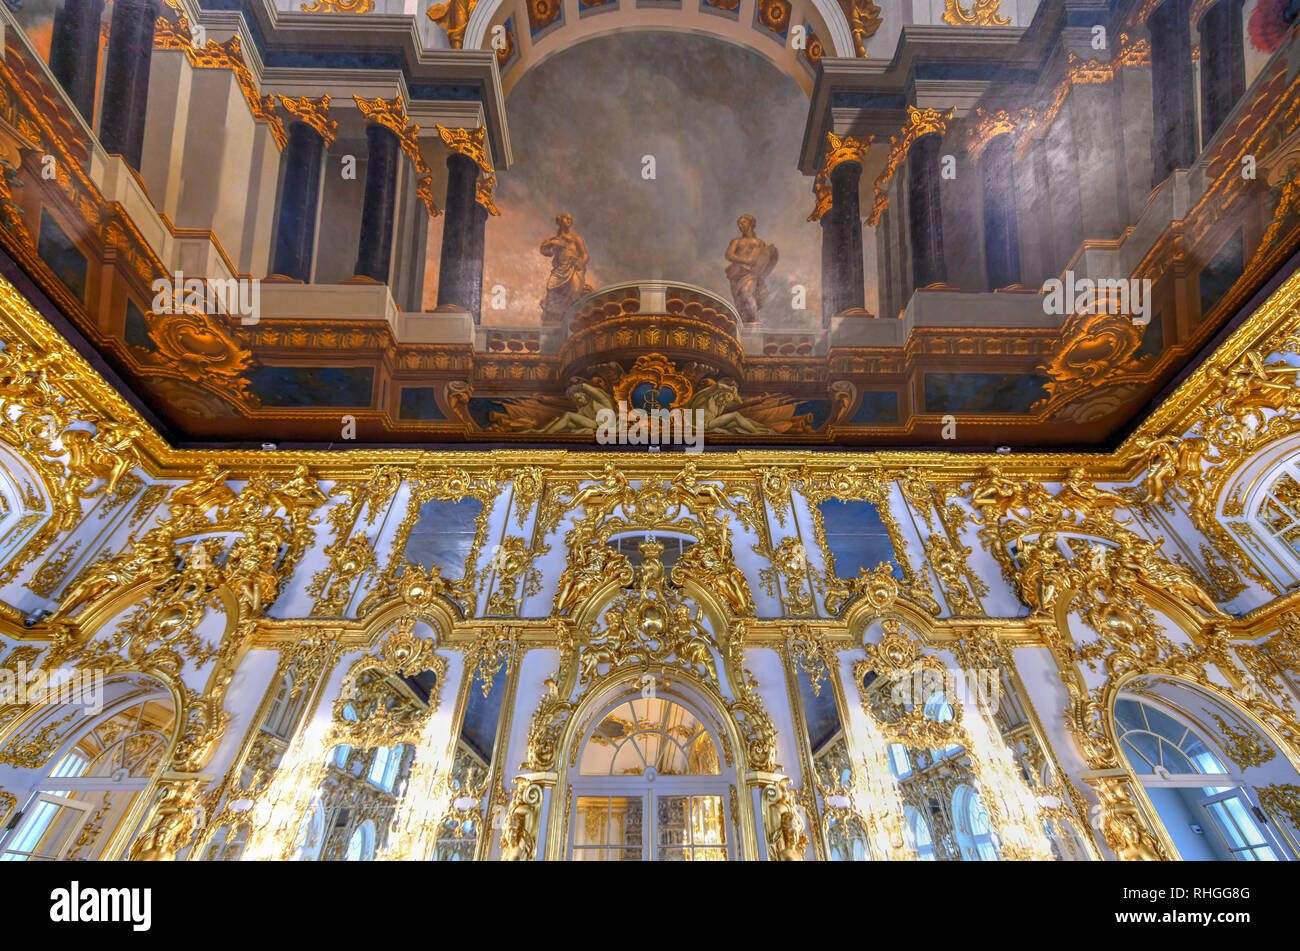 The Grand Hall of the Catherine Palace in Pushkin, Saint Petersburg, Russia. Stock Photo